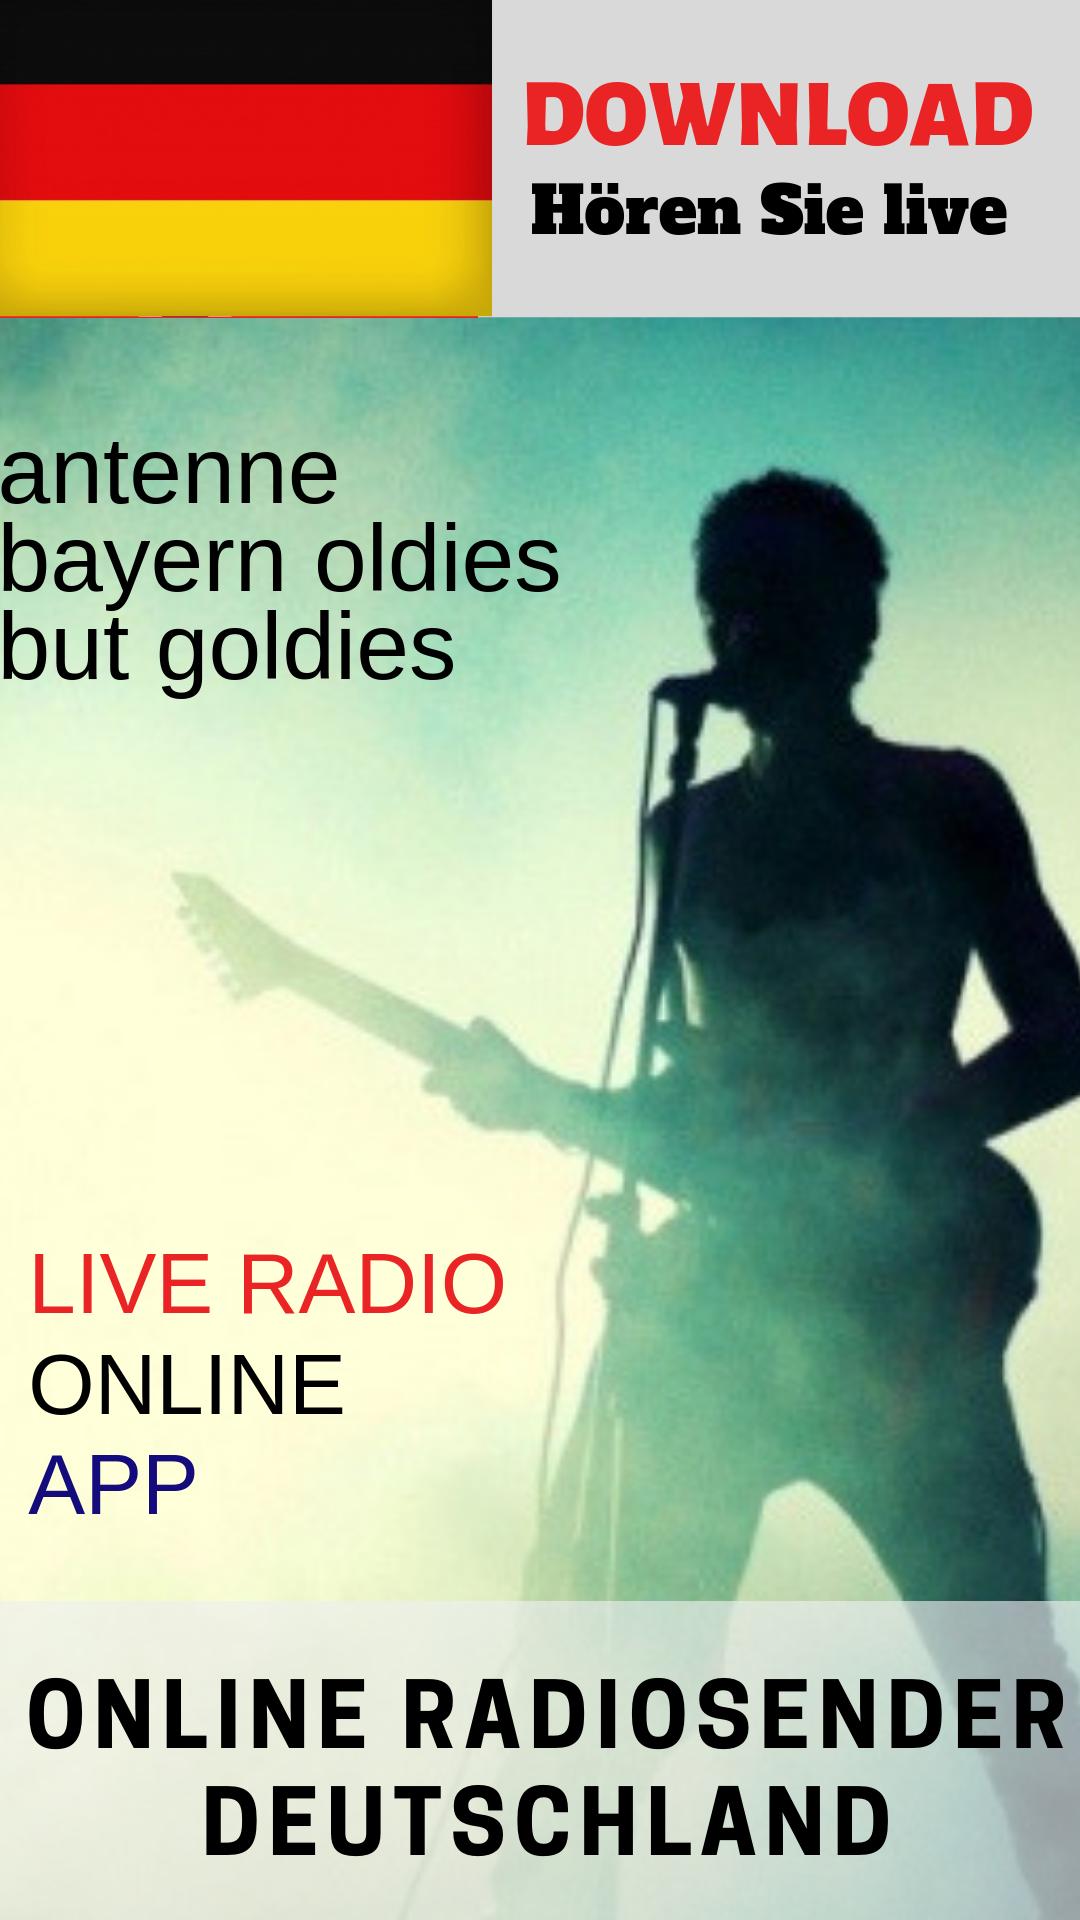 Antenne bayern oldies but goldies for Android - APK Download